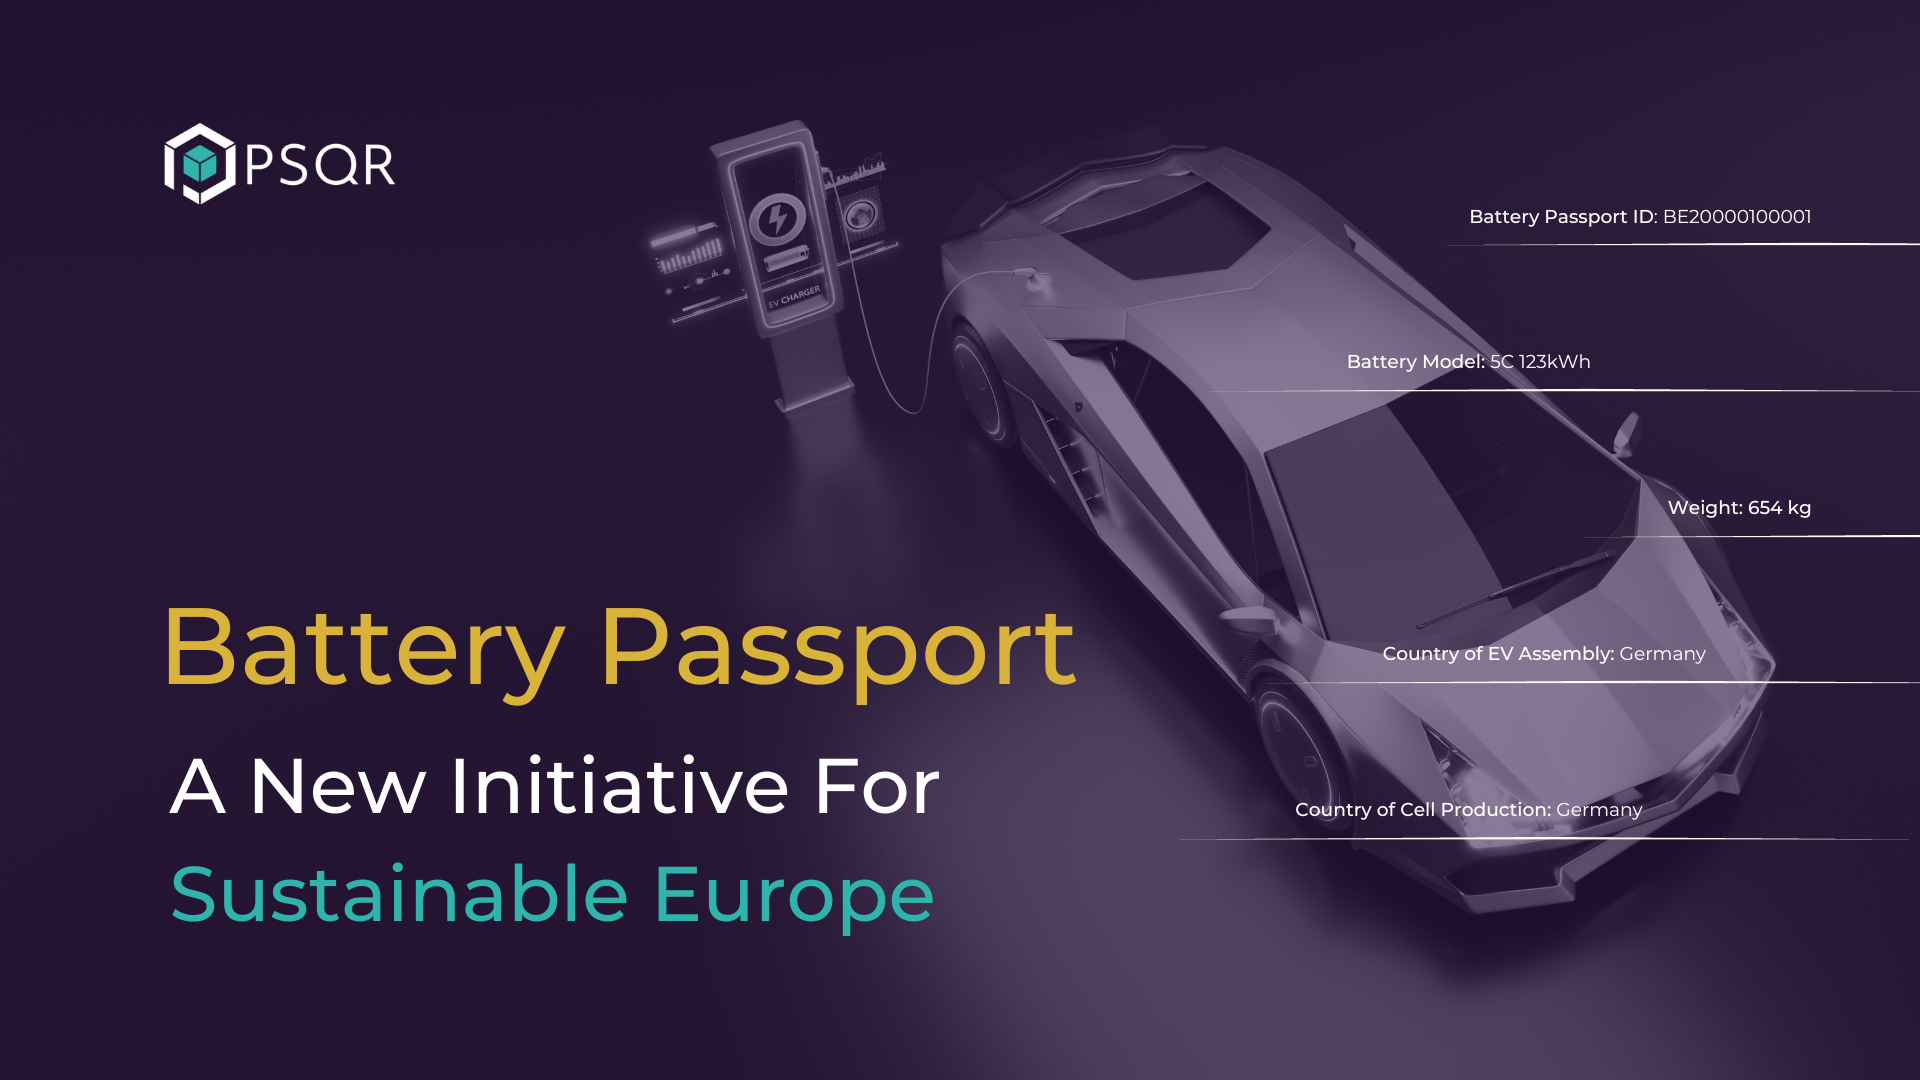 Feature image in purple with an electric vehicle charging at the station. Title: Battery Passport: A New Initiative for Sustainable Europe